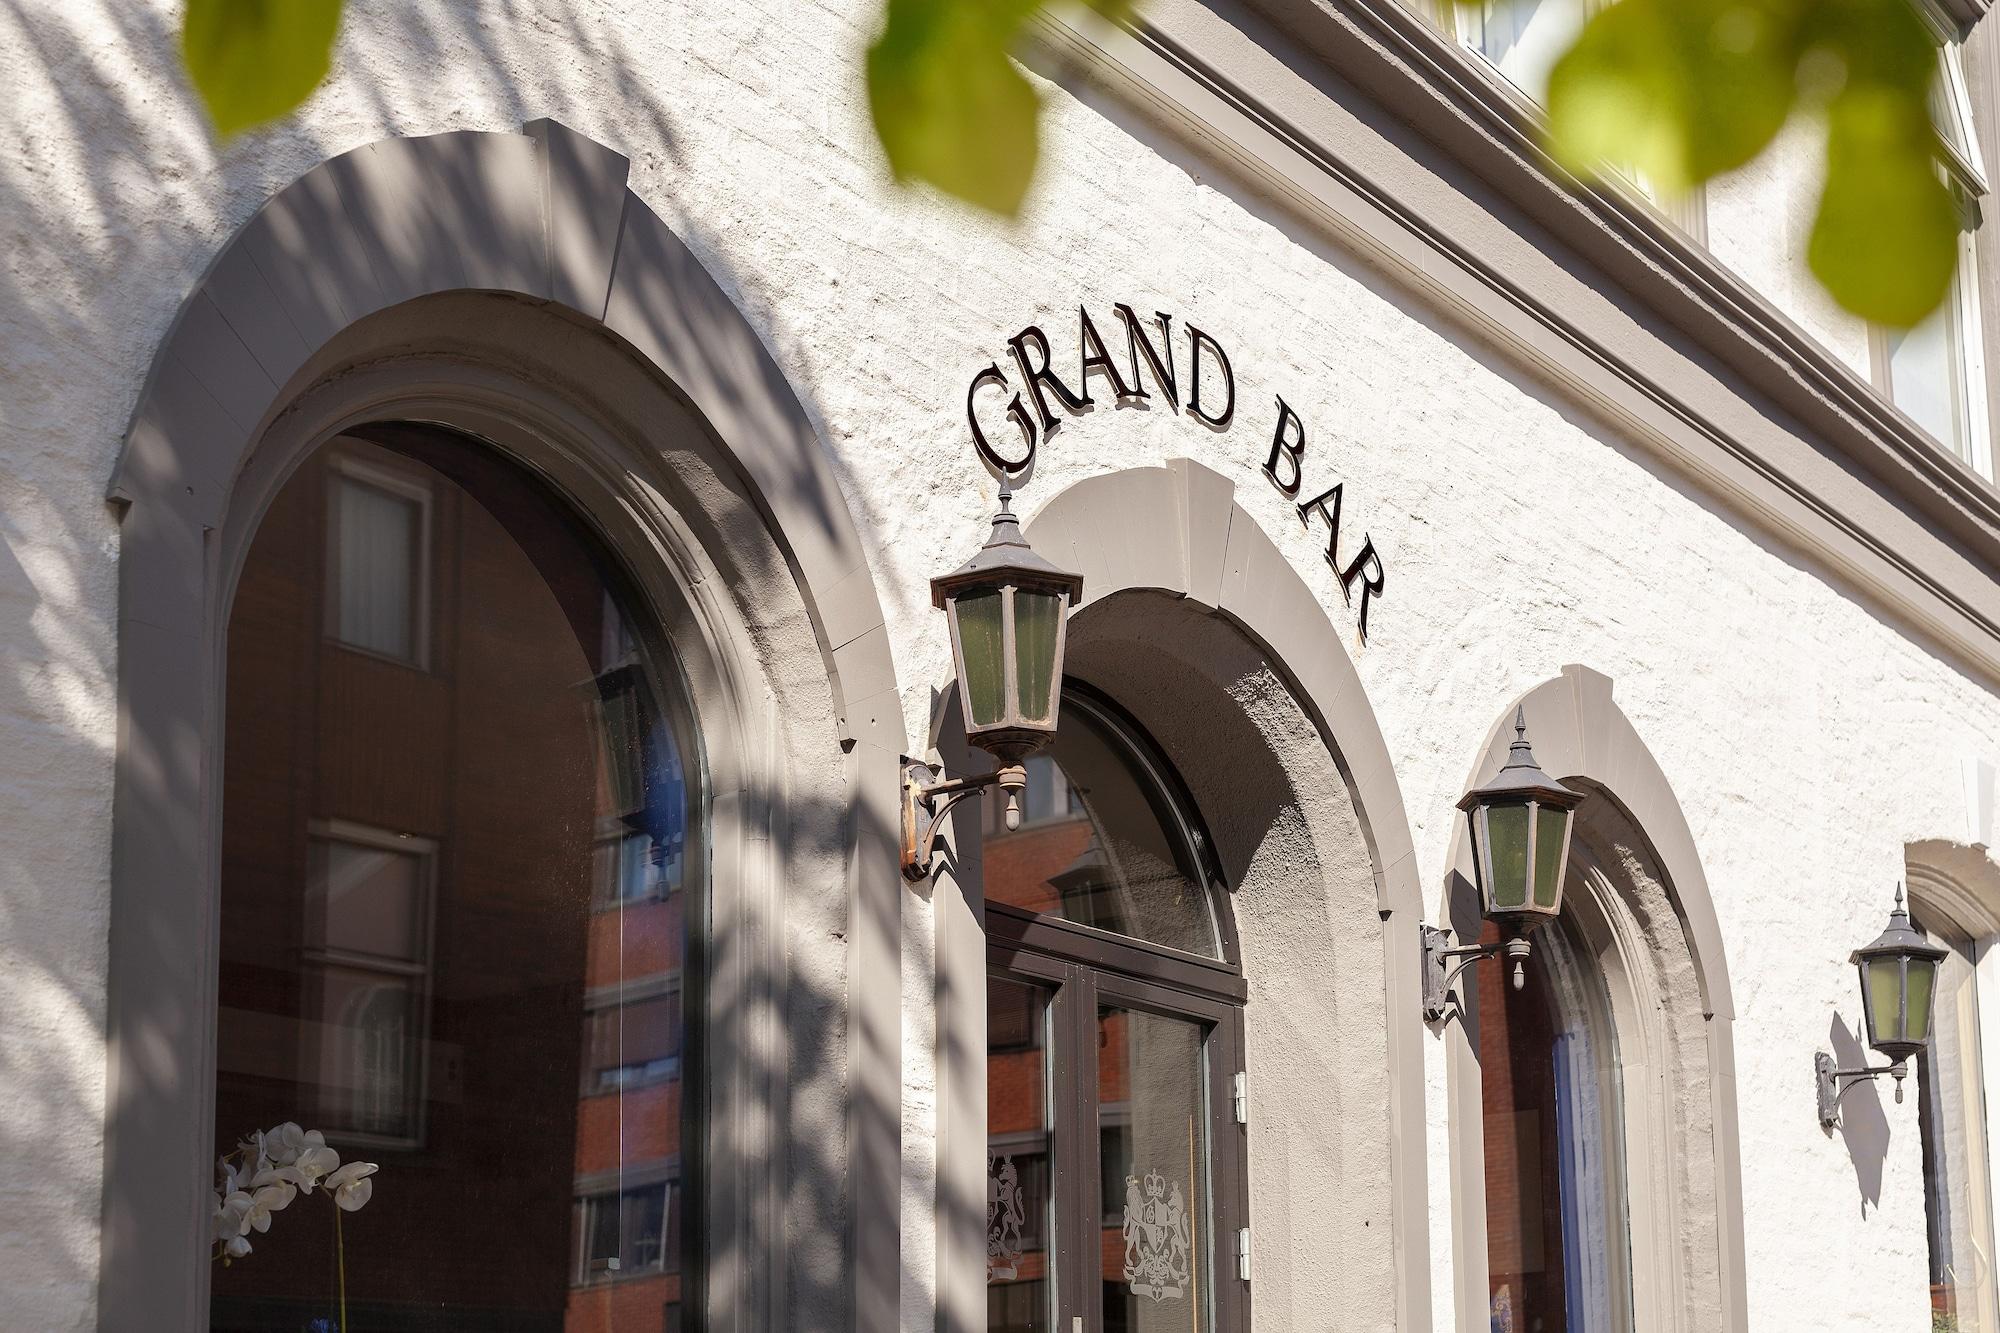 Grand Hotel Arendal image